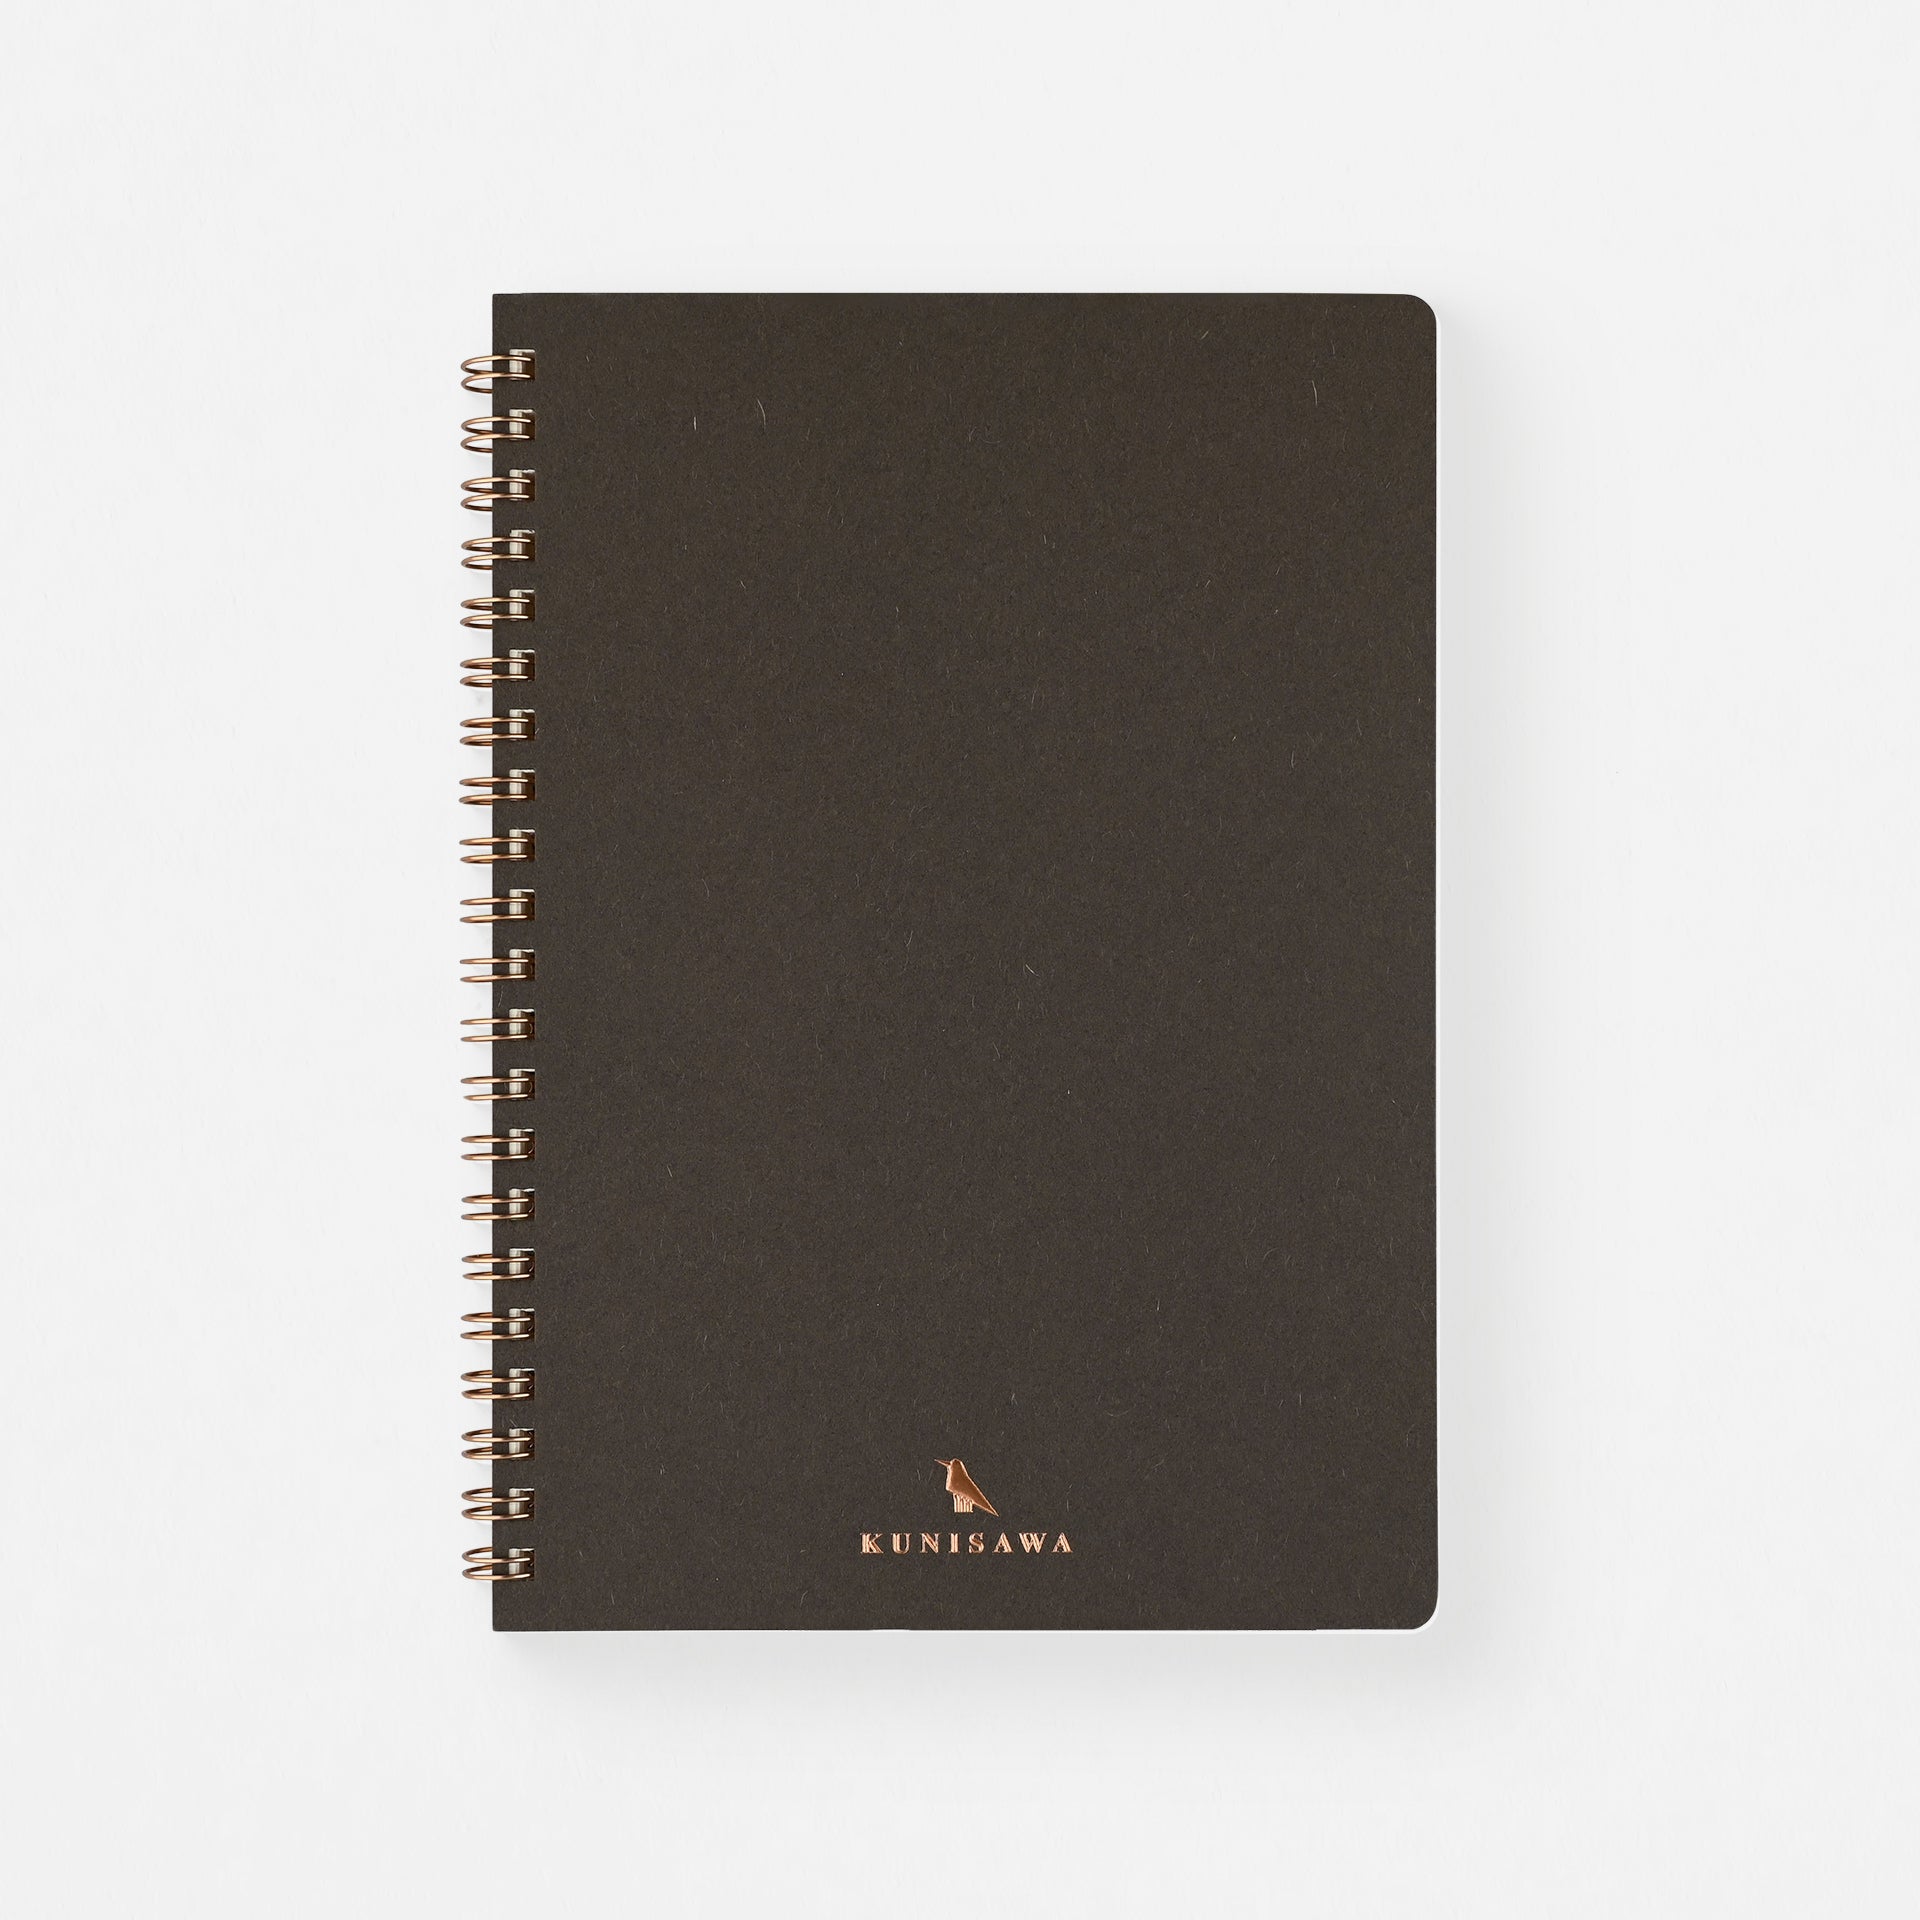 Kunisawa Find Ring Note Notebook A5 Or Executive | Grey, White, Charcoal, Blue Mist Or Indigo Charcoal / A5